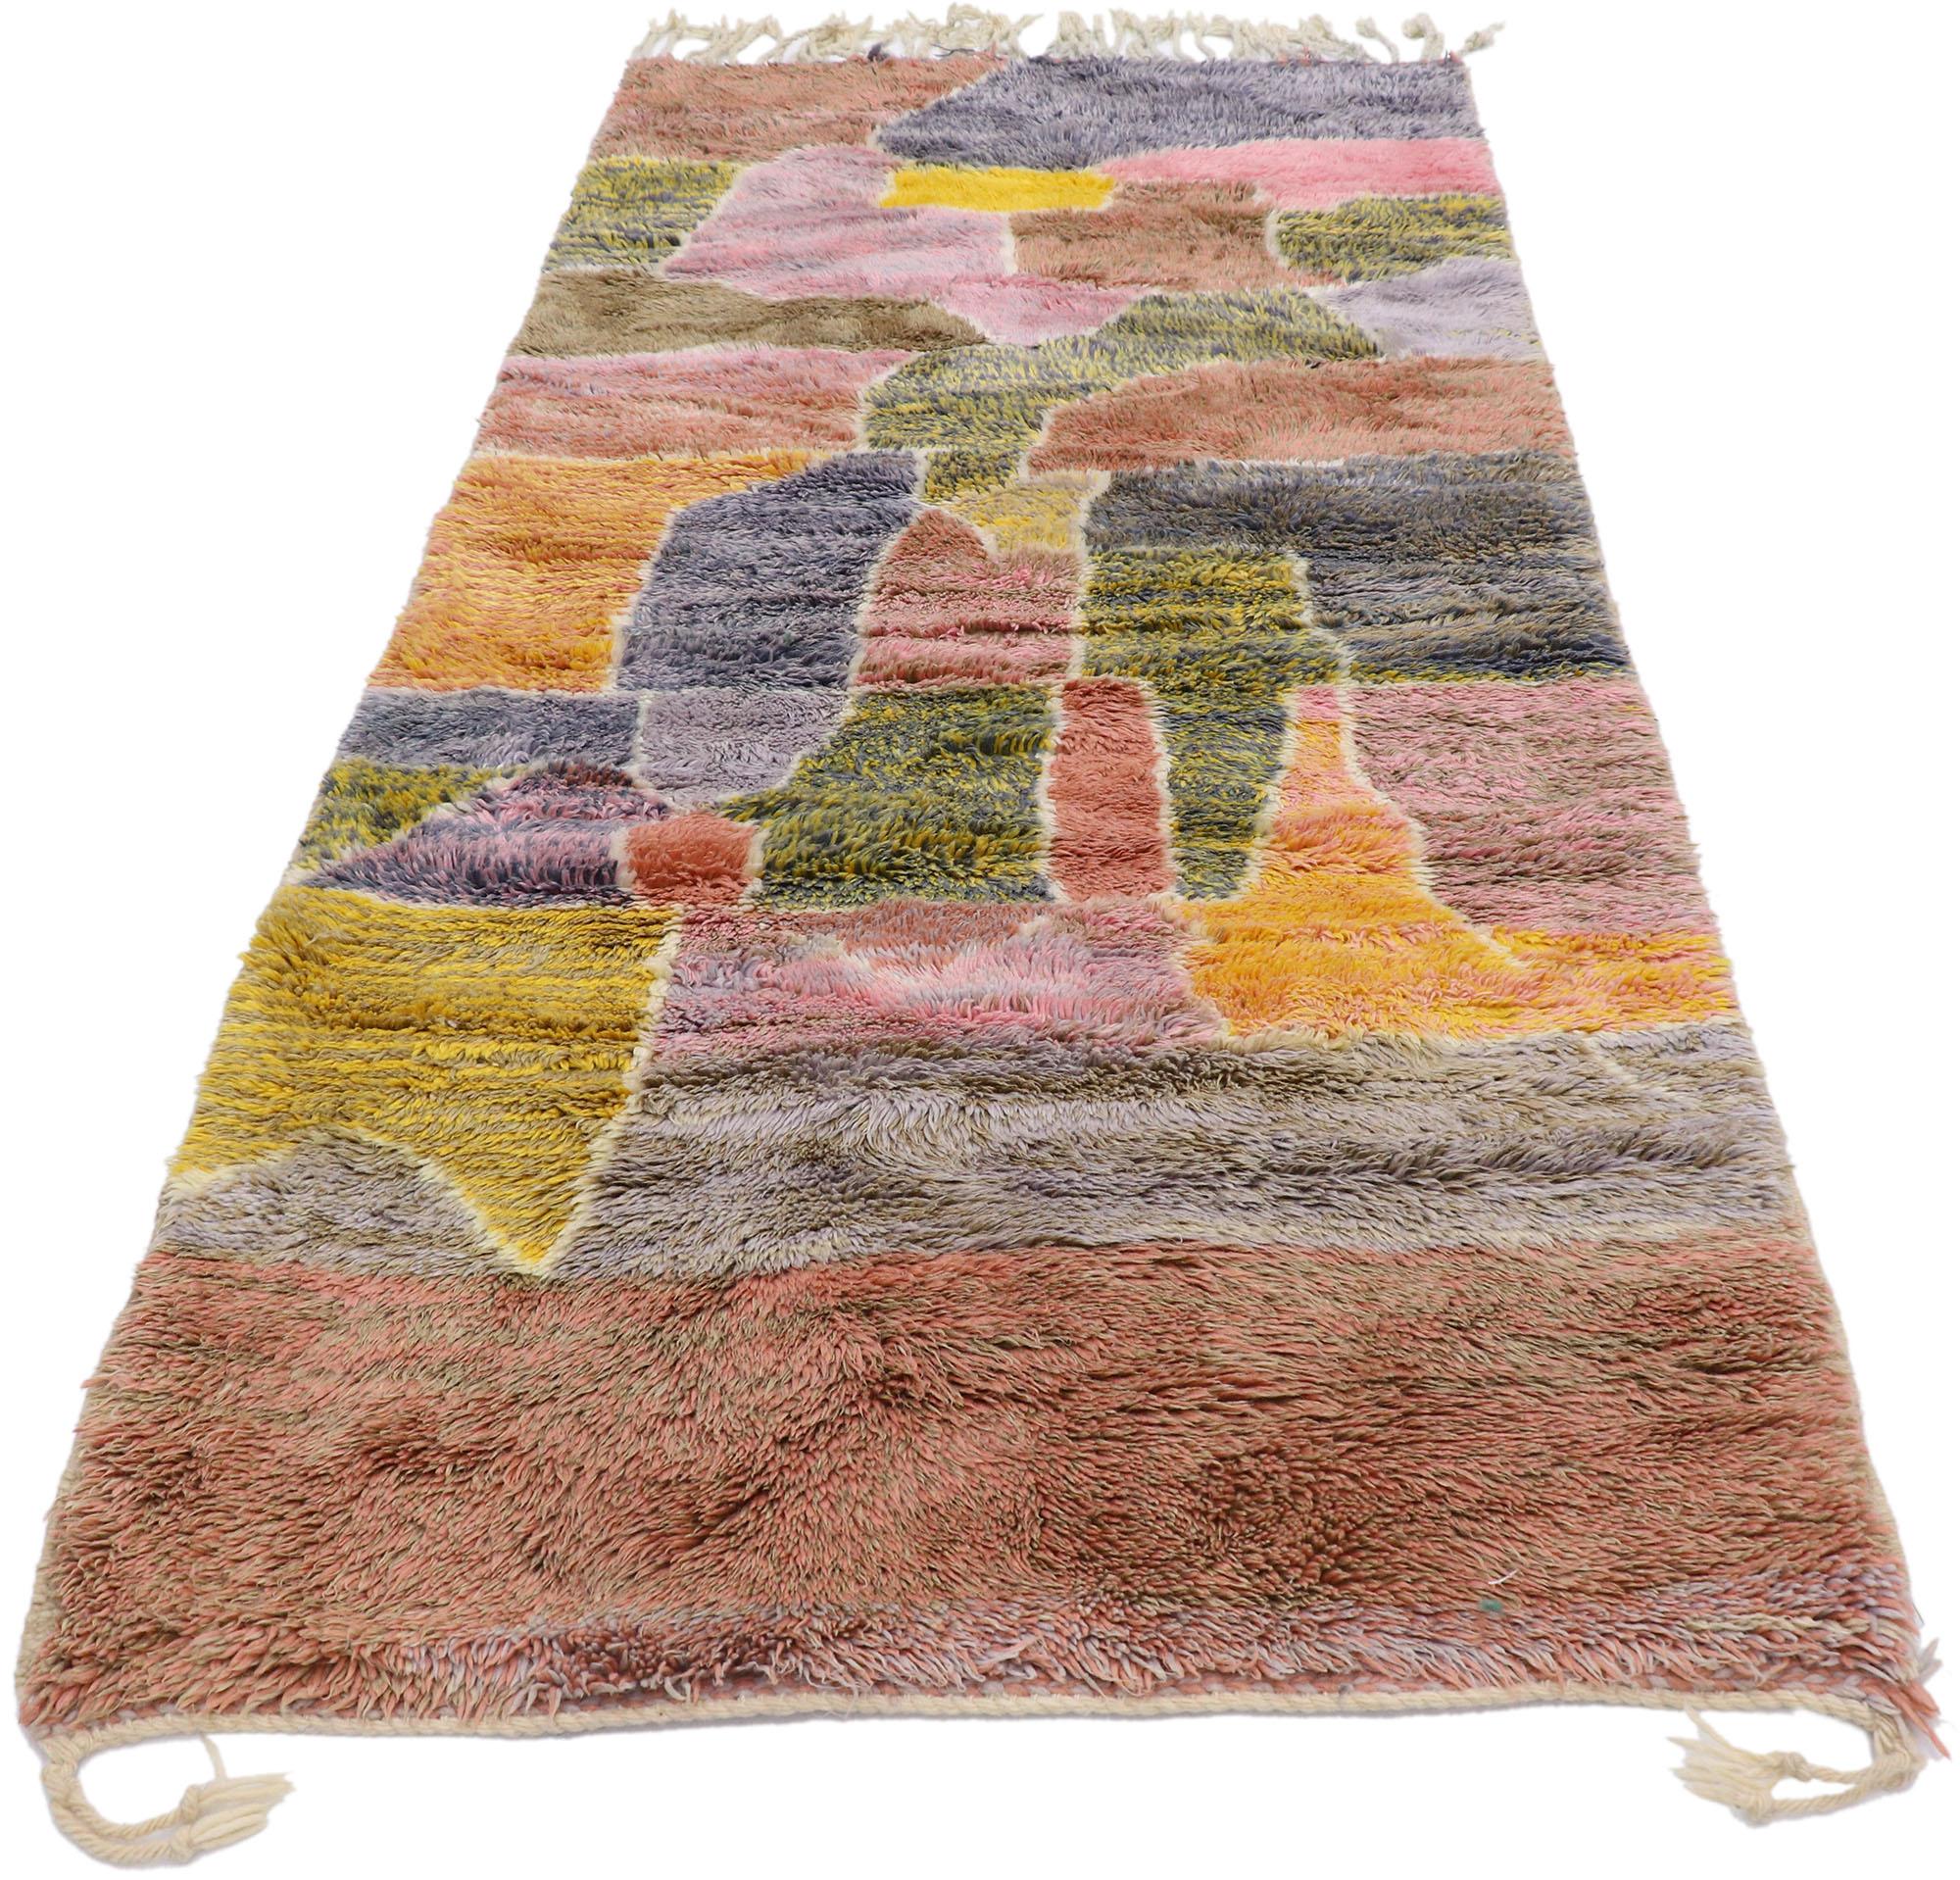 Tribal New Colorful Abstract Moroccan Rug with Soft Earth-Tone Colors For Sale